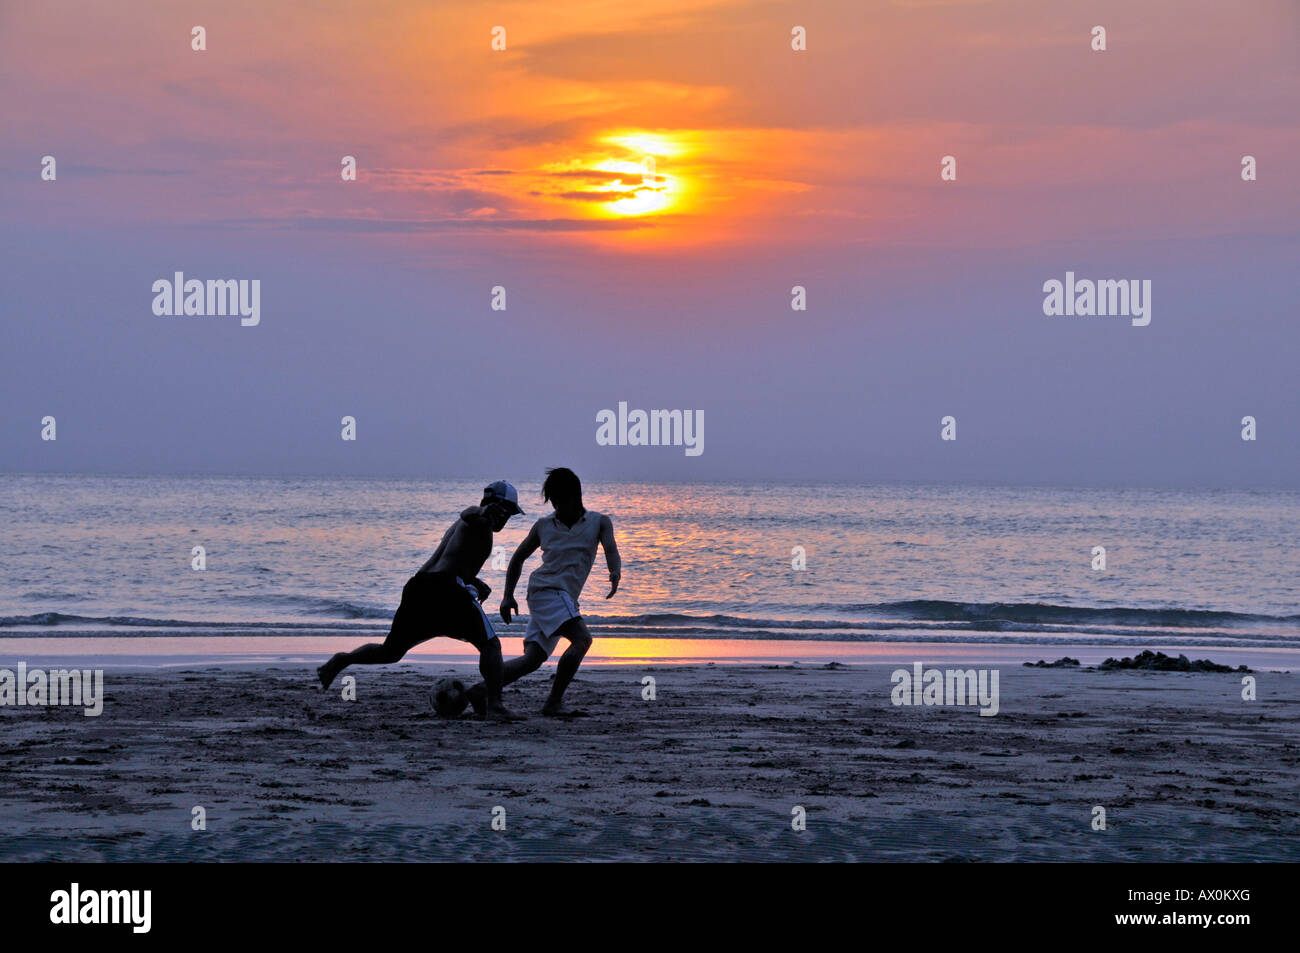 Playing football (soccer) on the beach, Koh Chang, Thailand, Southeast Asia, Asia Stock Photo